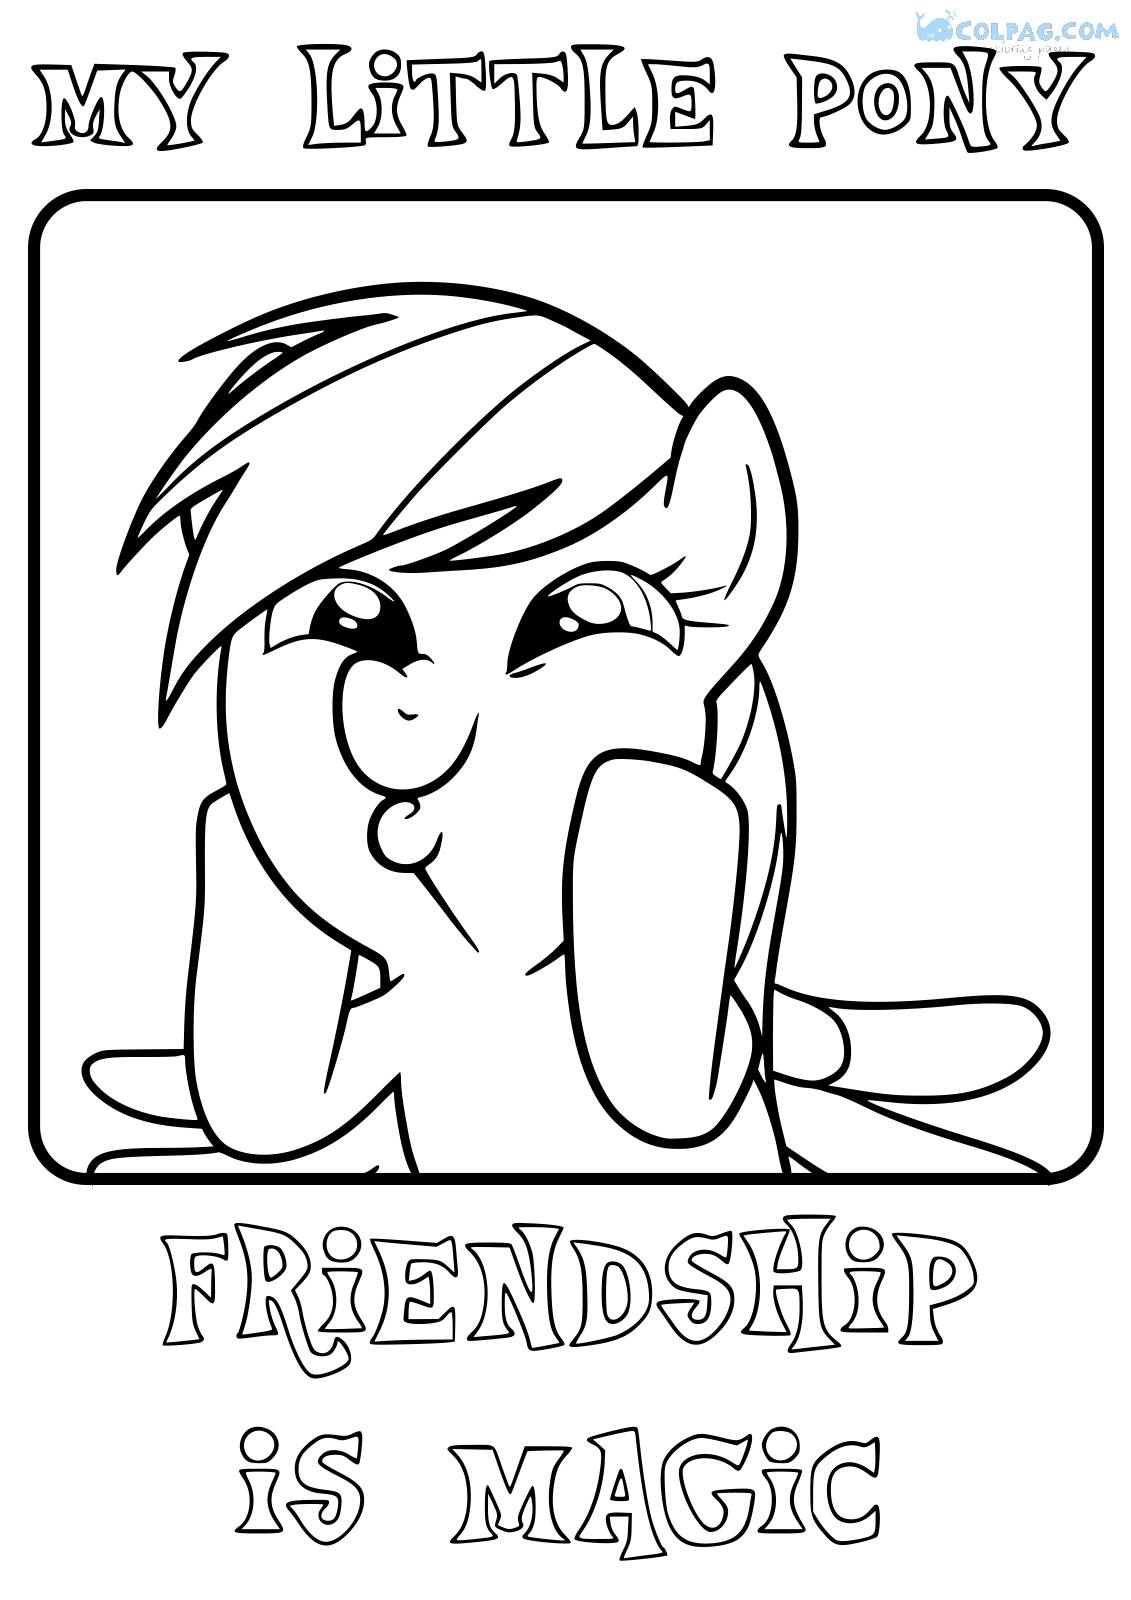 Rainbow Dash Coloring Pages to Print Online